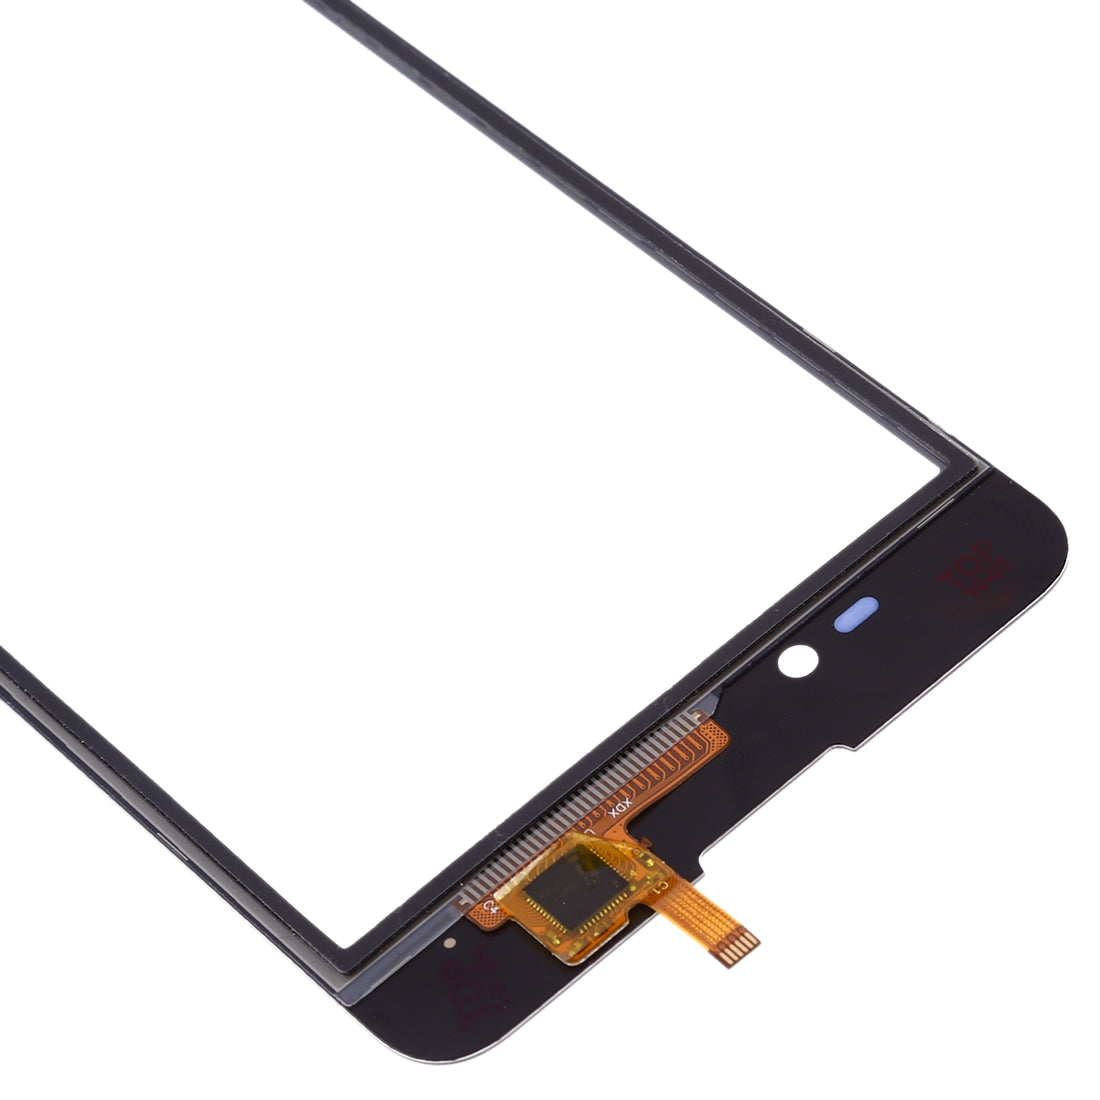 Touch Screen Digitizer Wiko Sunny 2 Plus Black